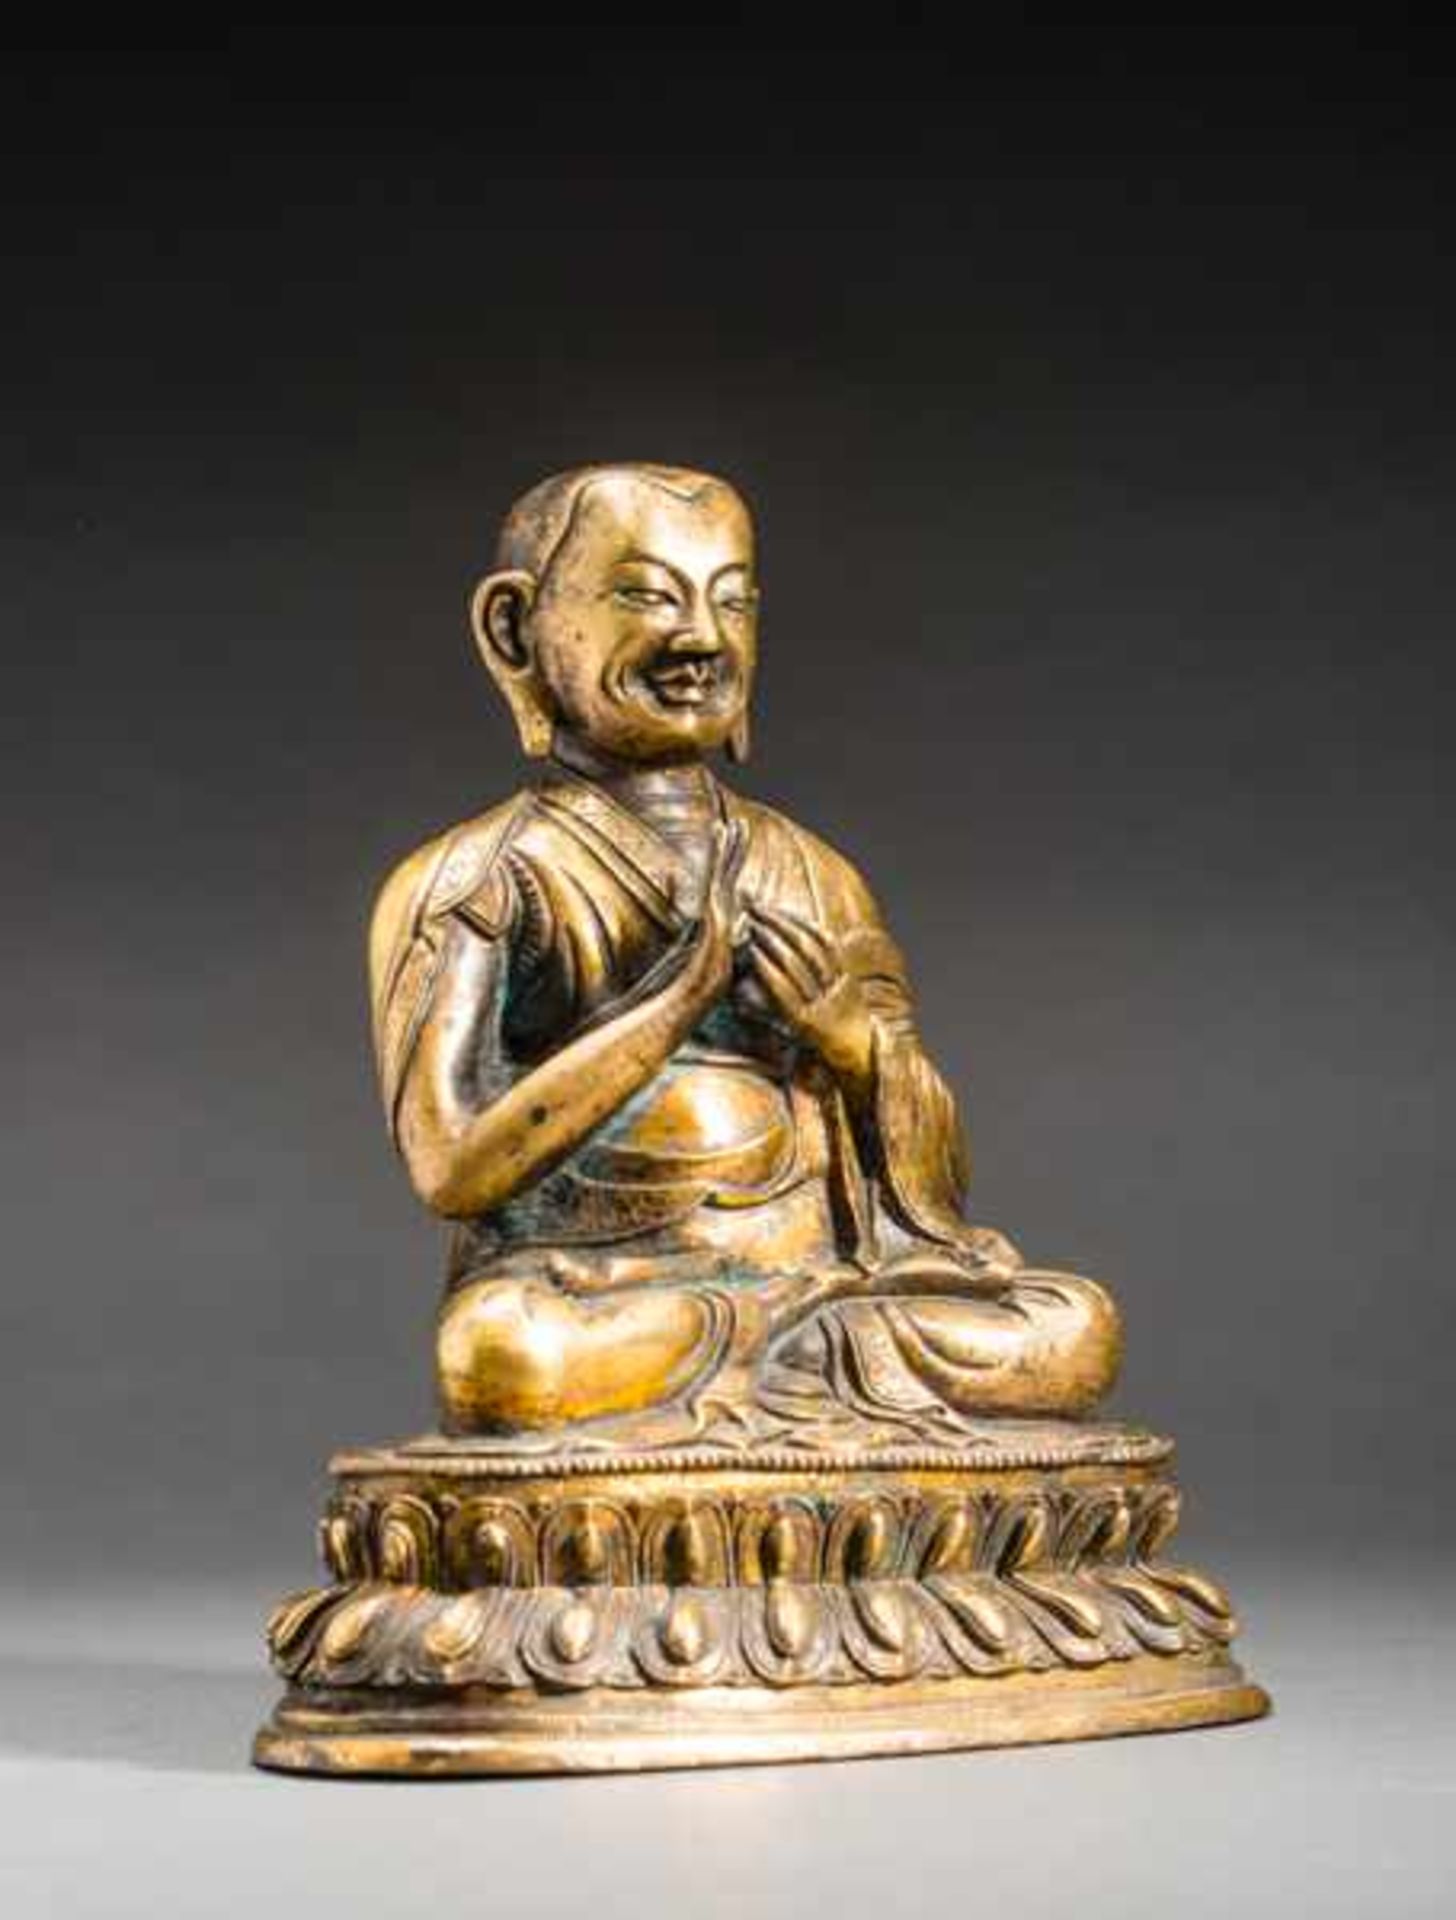 HOLY GURU Fire-gilded bronze. Tibet, late 17th to 18th cent.Expressively designed bronze figure of a - Image 3 of 6